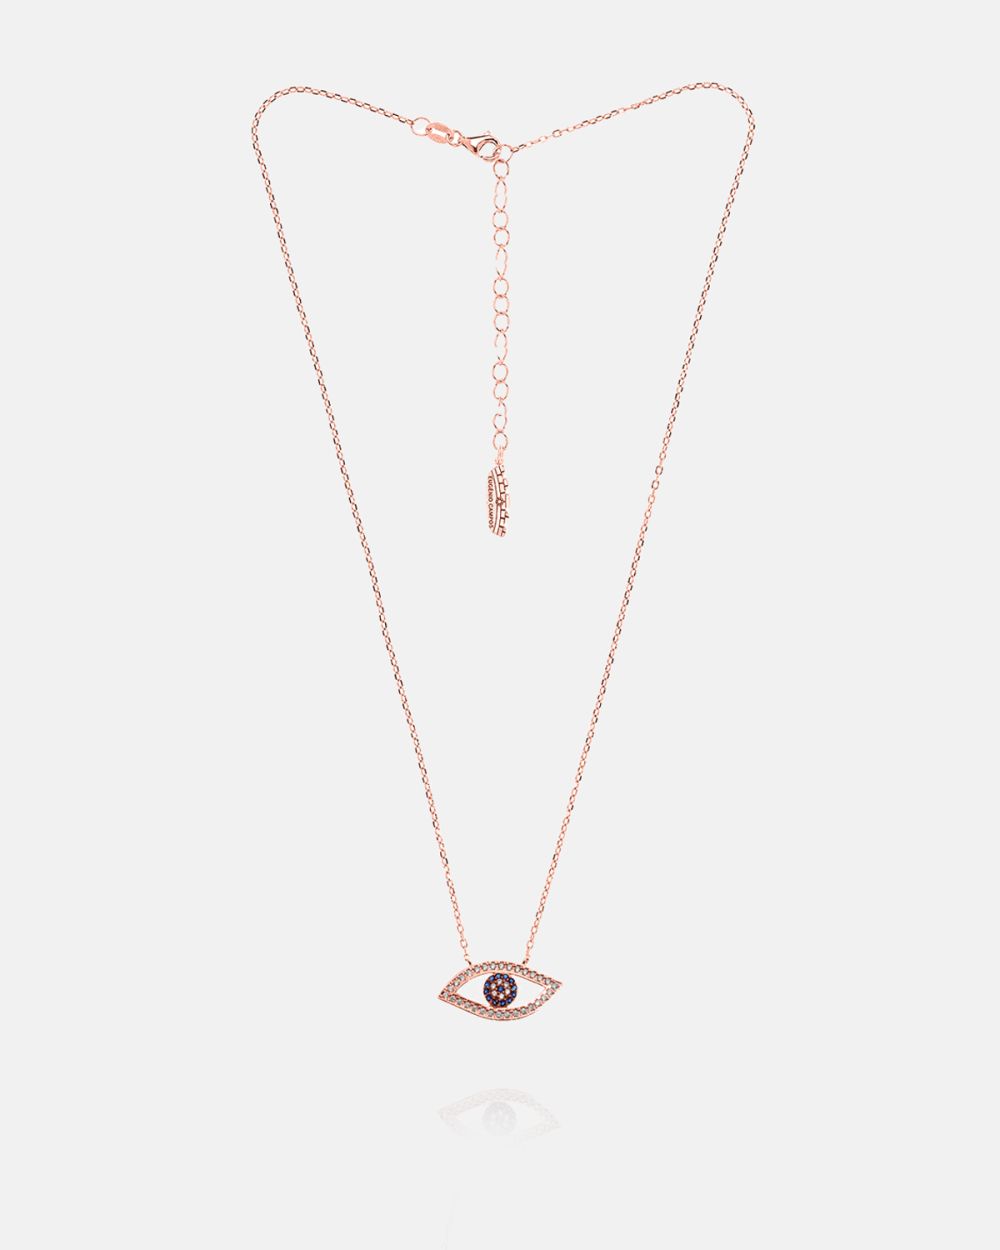 Blue Mystic Eye Necklace in Rose Silver with Zirconias